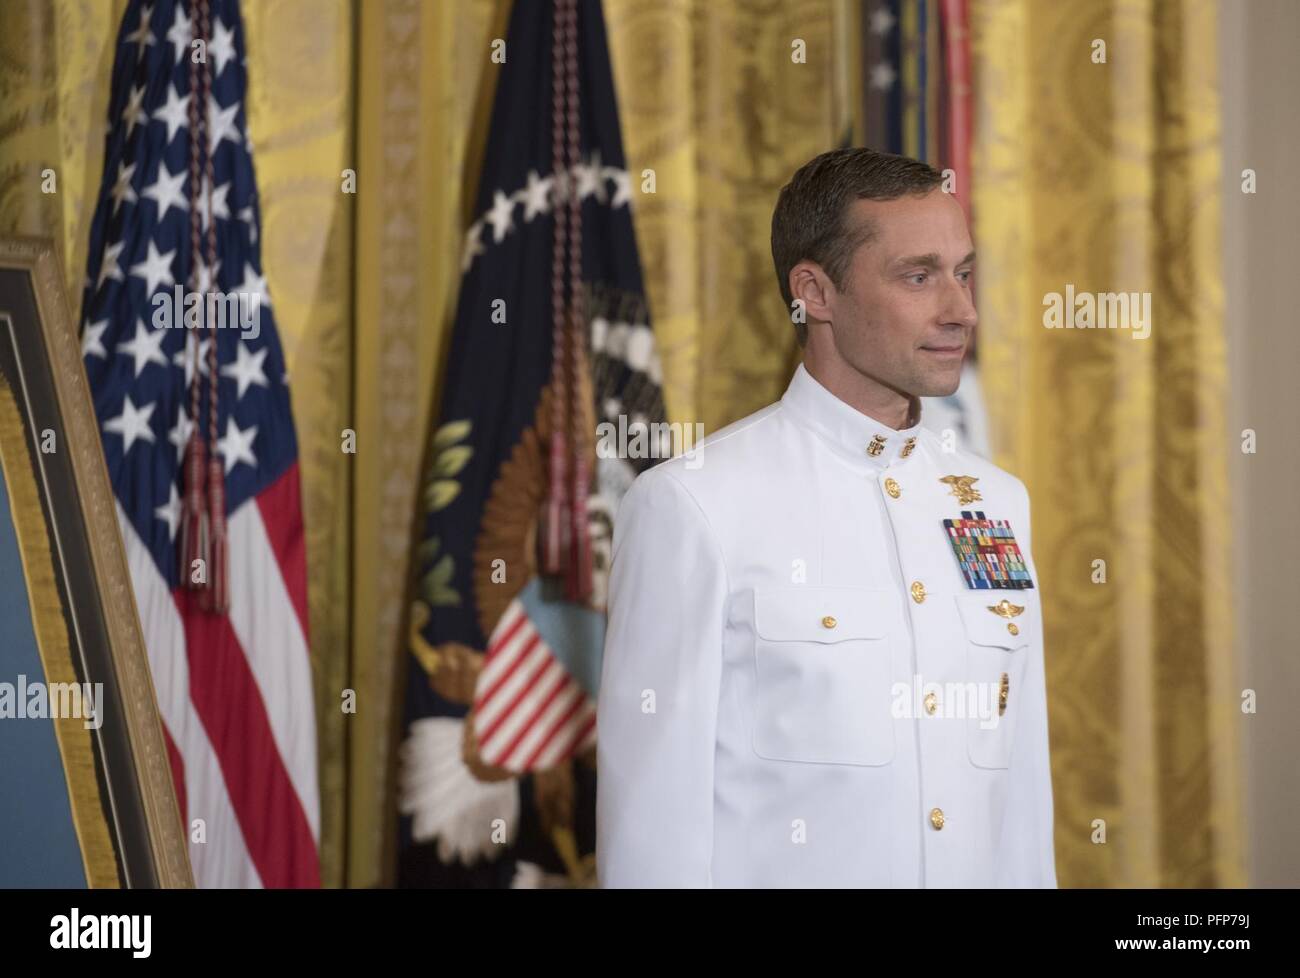 (May 24, 2018) Retired Master Chief Special Warfare Operator (SEAL) Britt Slabinski stands at attention during a Medal of Honor ceremony at the White House in Washington, D.C. Slabinski received the Medal of Honor for his actions during Operation Anaconda in Afghanistan in March 2002. Stock Photo